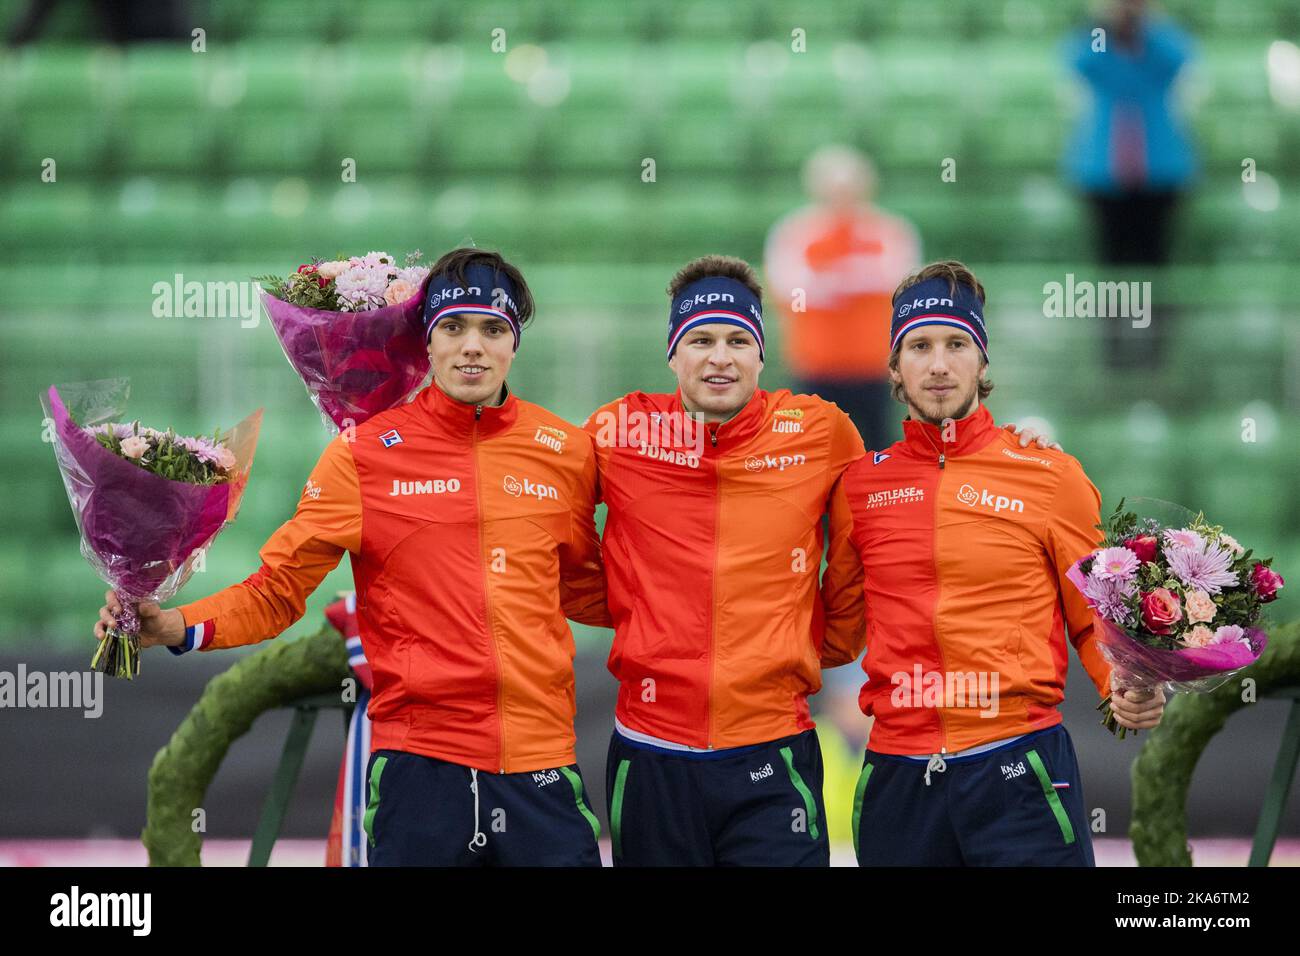 L-R Second placed Patrick Roest, winner Sven Kramer and third placed Jan Blokhuijsen all from the Netherlands after the 5000 m ISU World Allround Speed Skating Championships at Vikingskipet Olympic Hall in Hamar, Saturday, March 4, 2017. Photo: Fredrik Varfjell / NTB scanpix Stock Photo